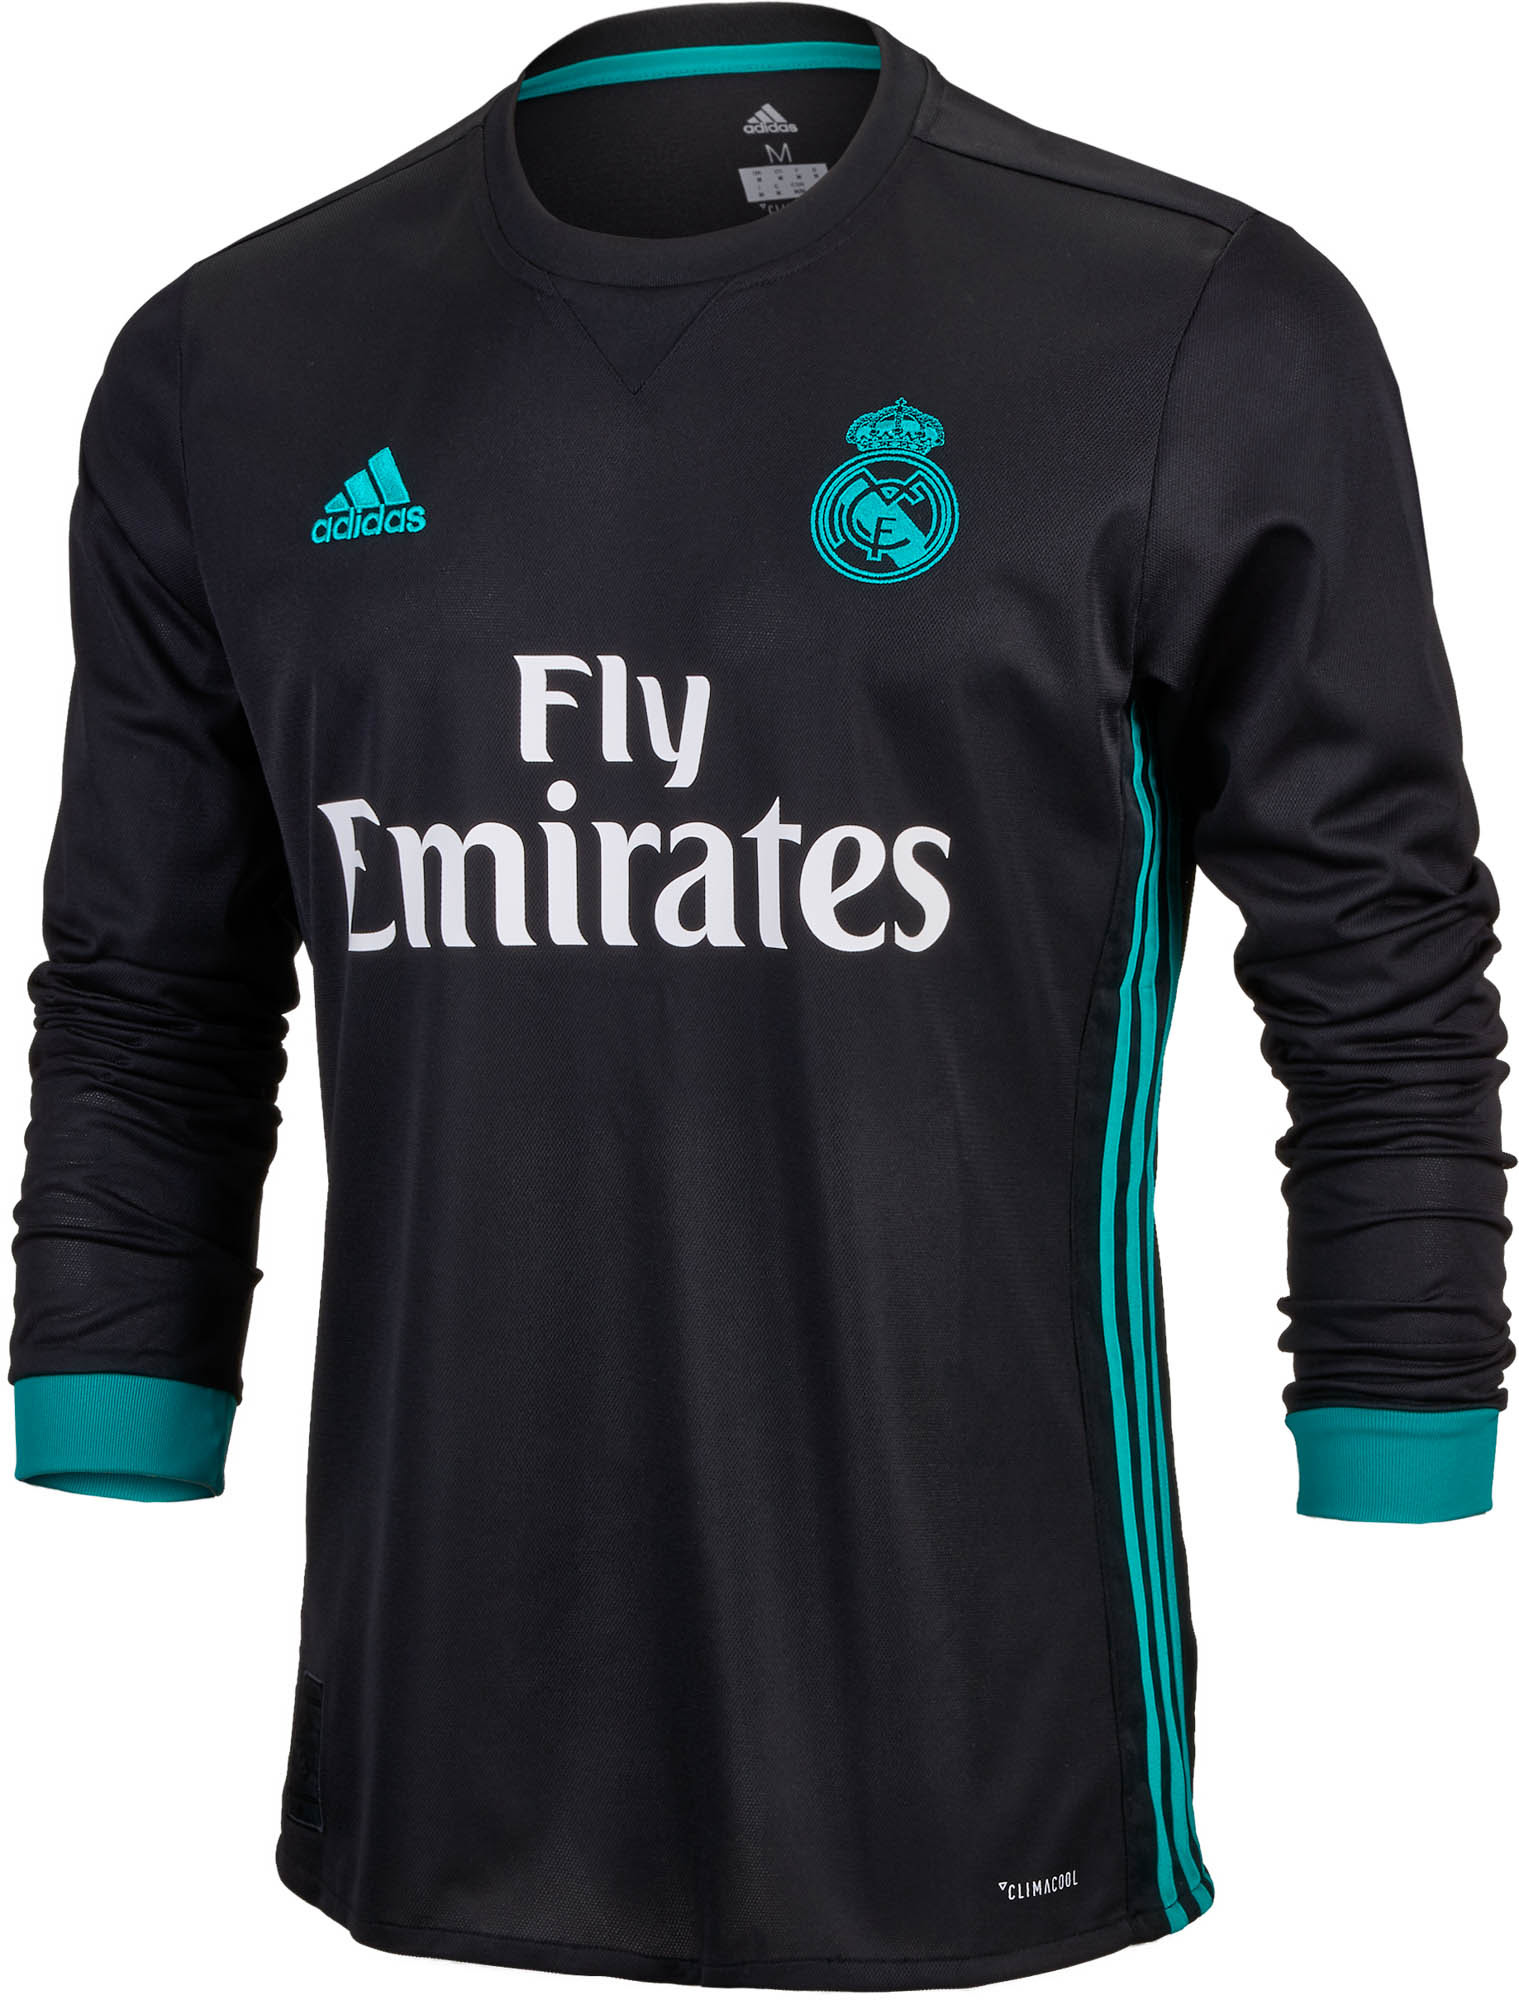 2017/18 adidas Real Madrid L/S Away Jersey Real Madrid